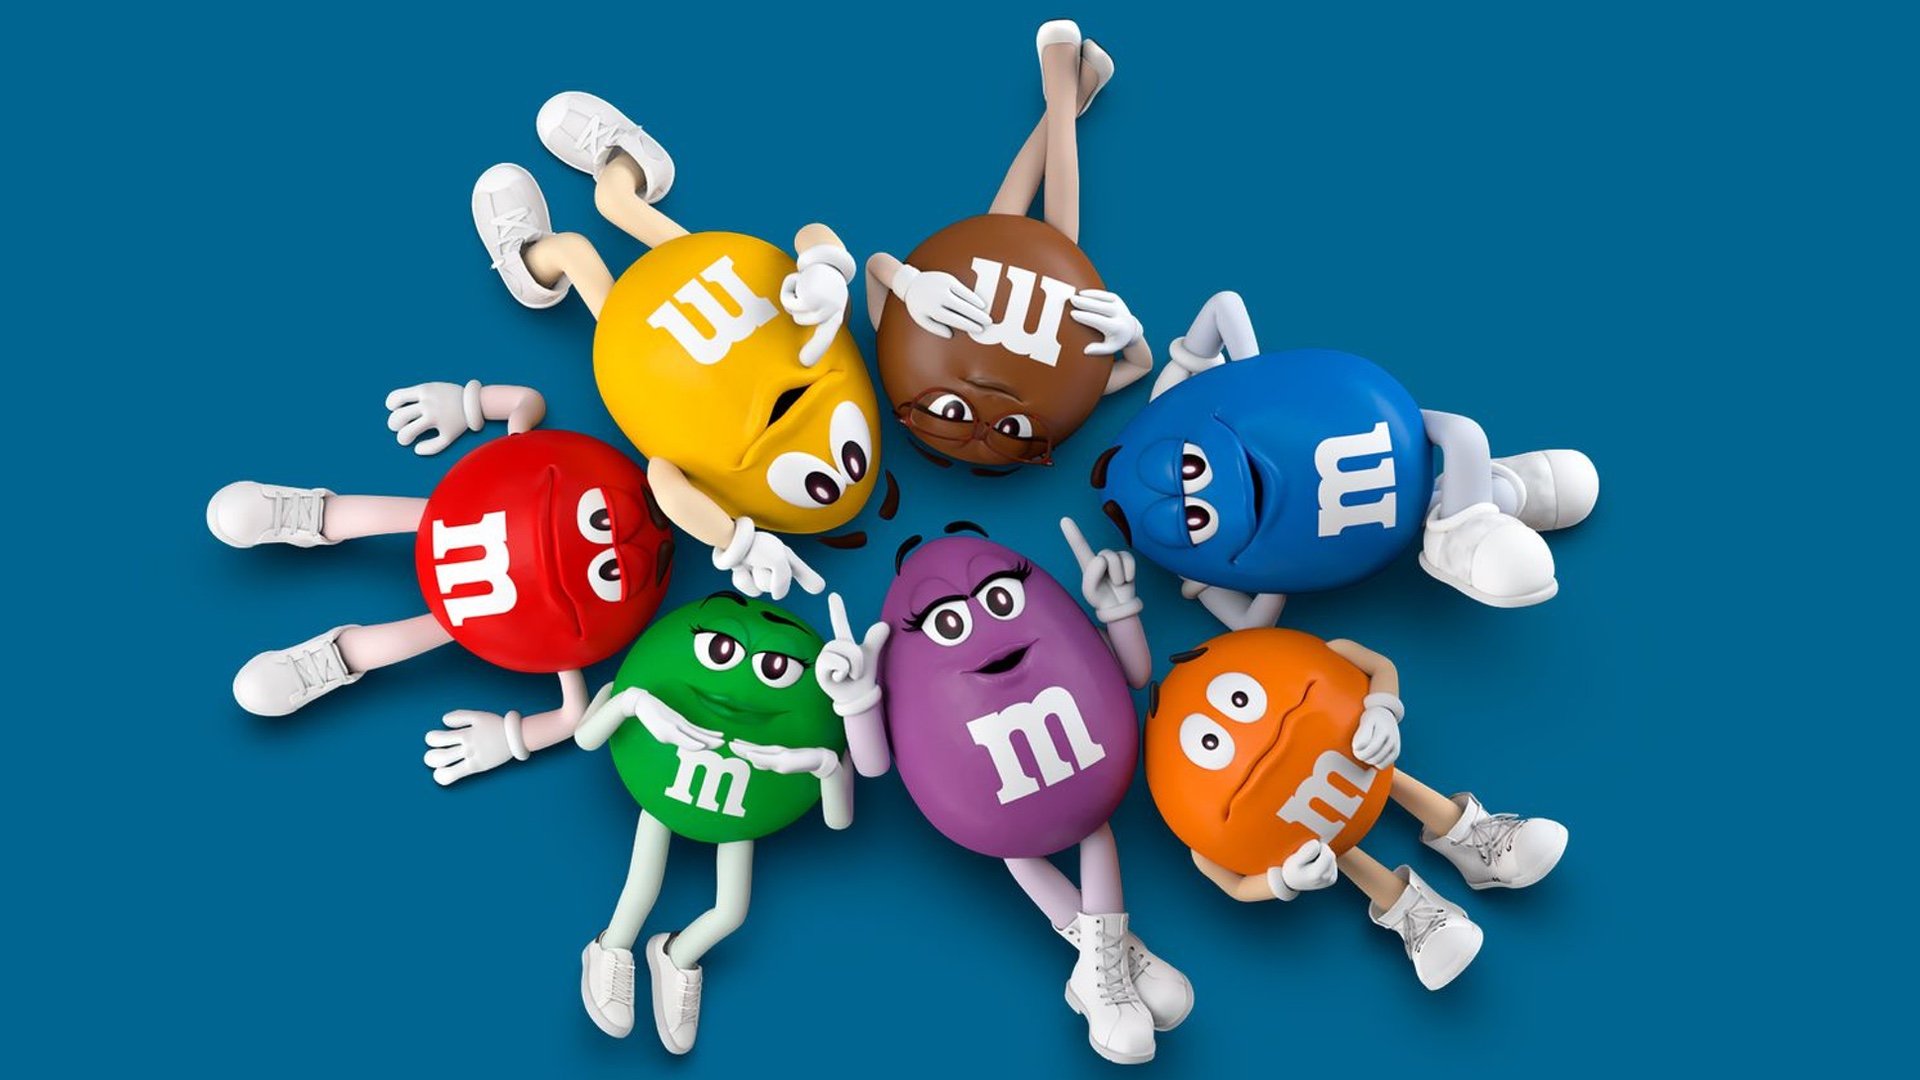 M&Ms Drops Candy Spokespeople After Backlash to Purple Character - TheStreet